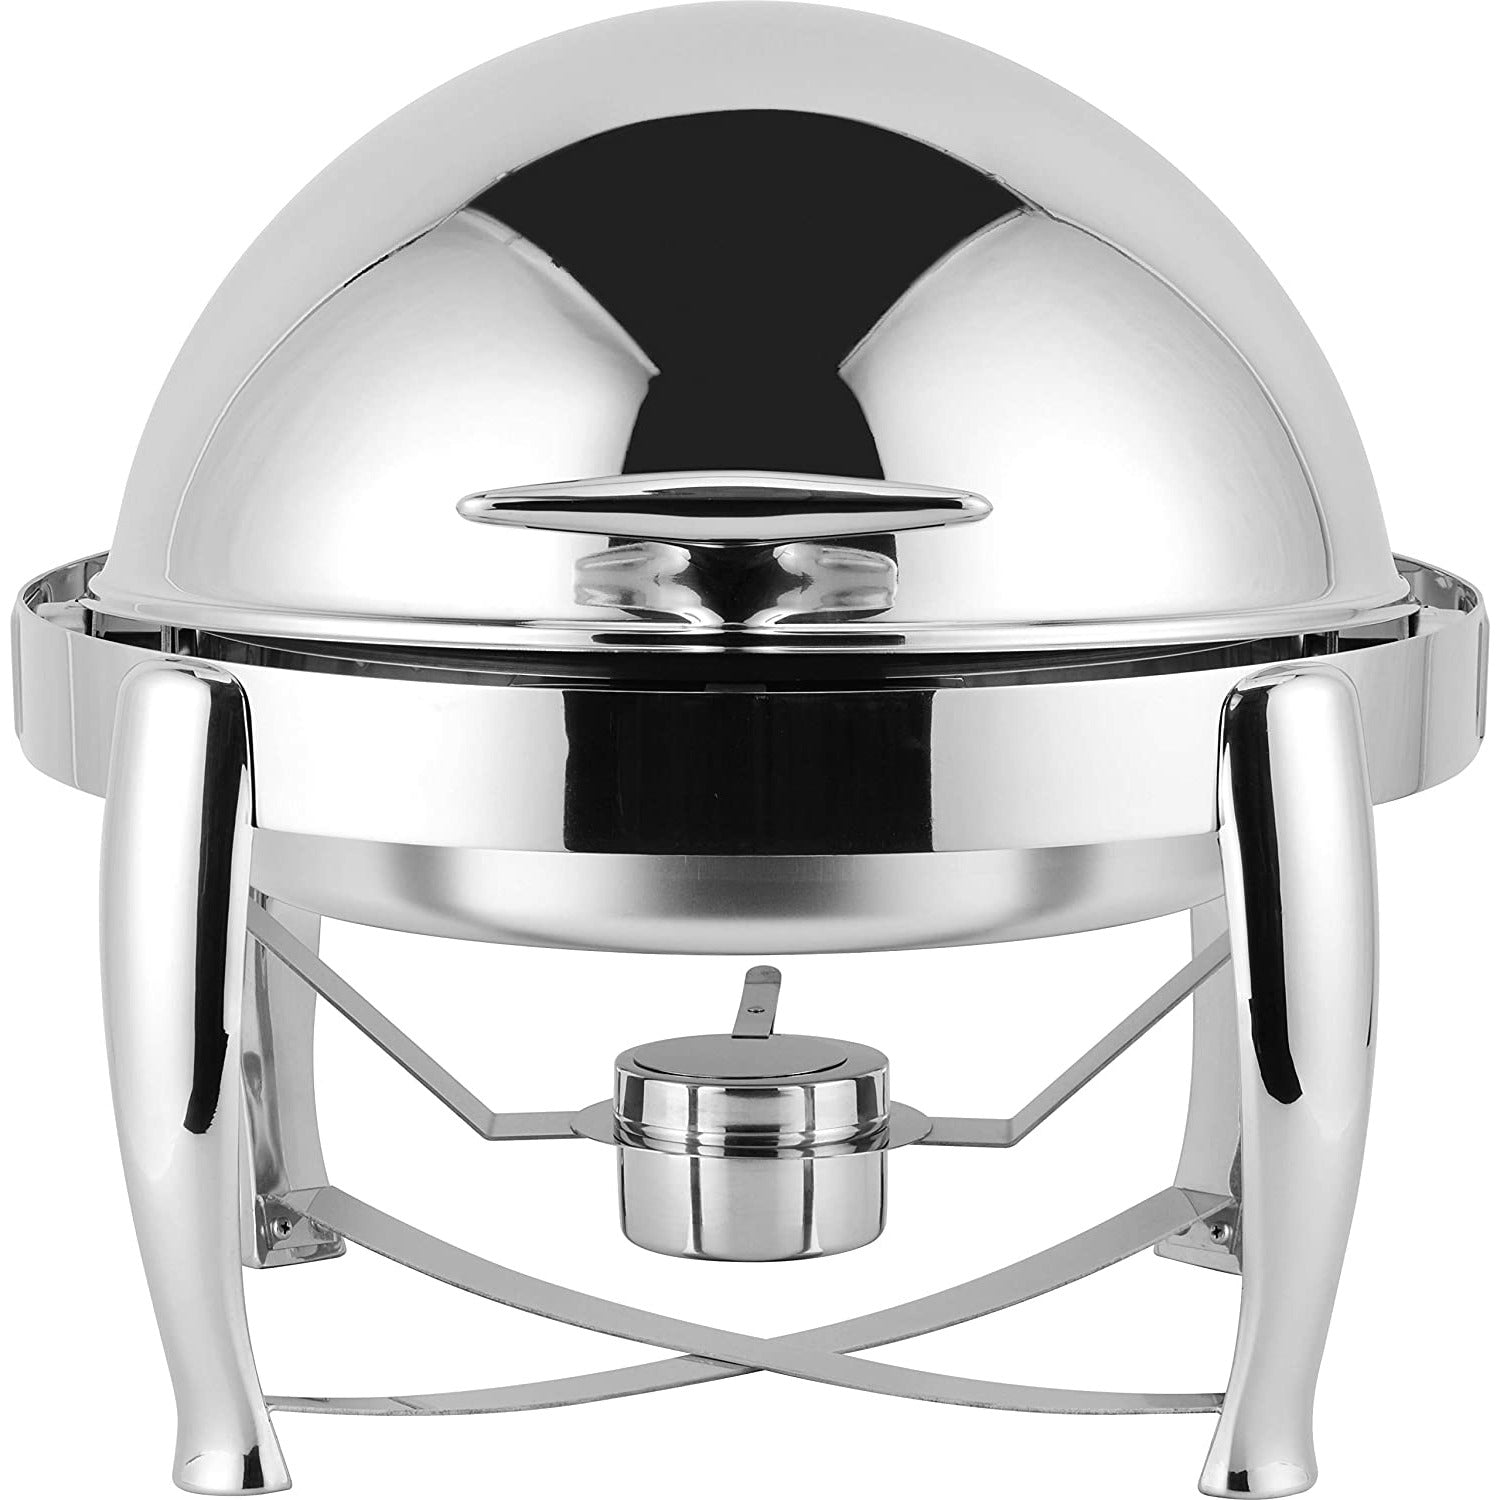 Virtuosa Deluxe High End Stainless Steel Chafer with Roll Top, 6 Quart